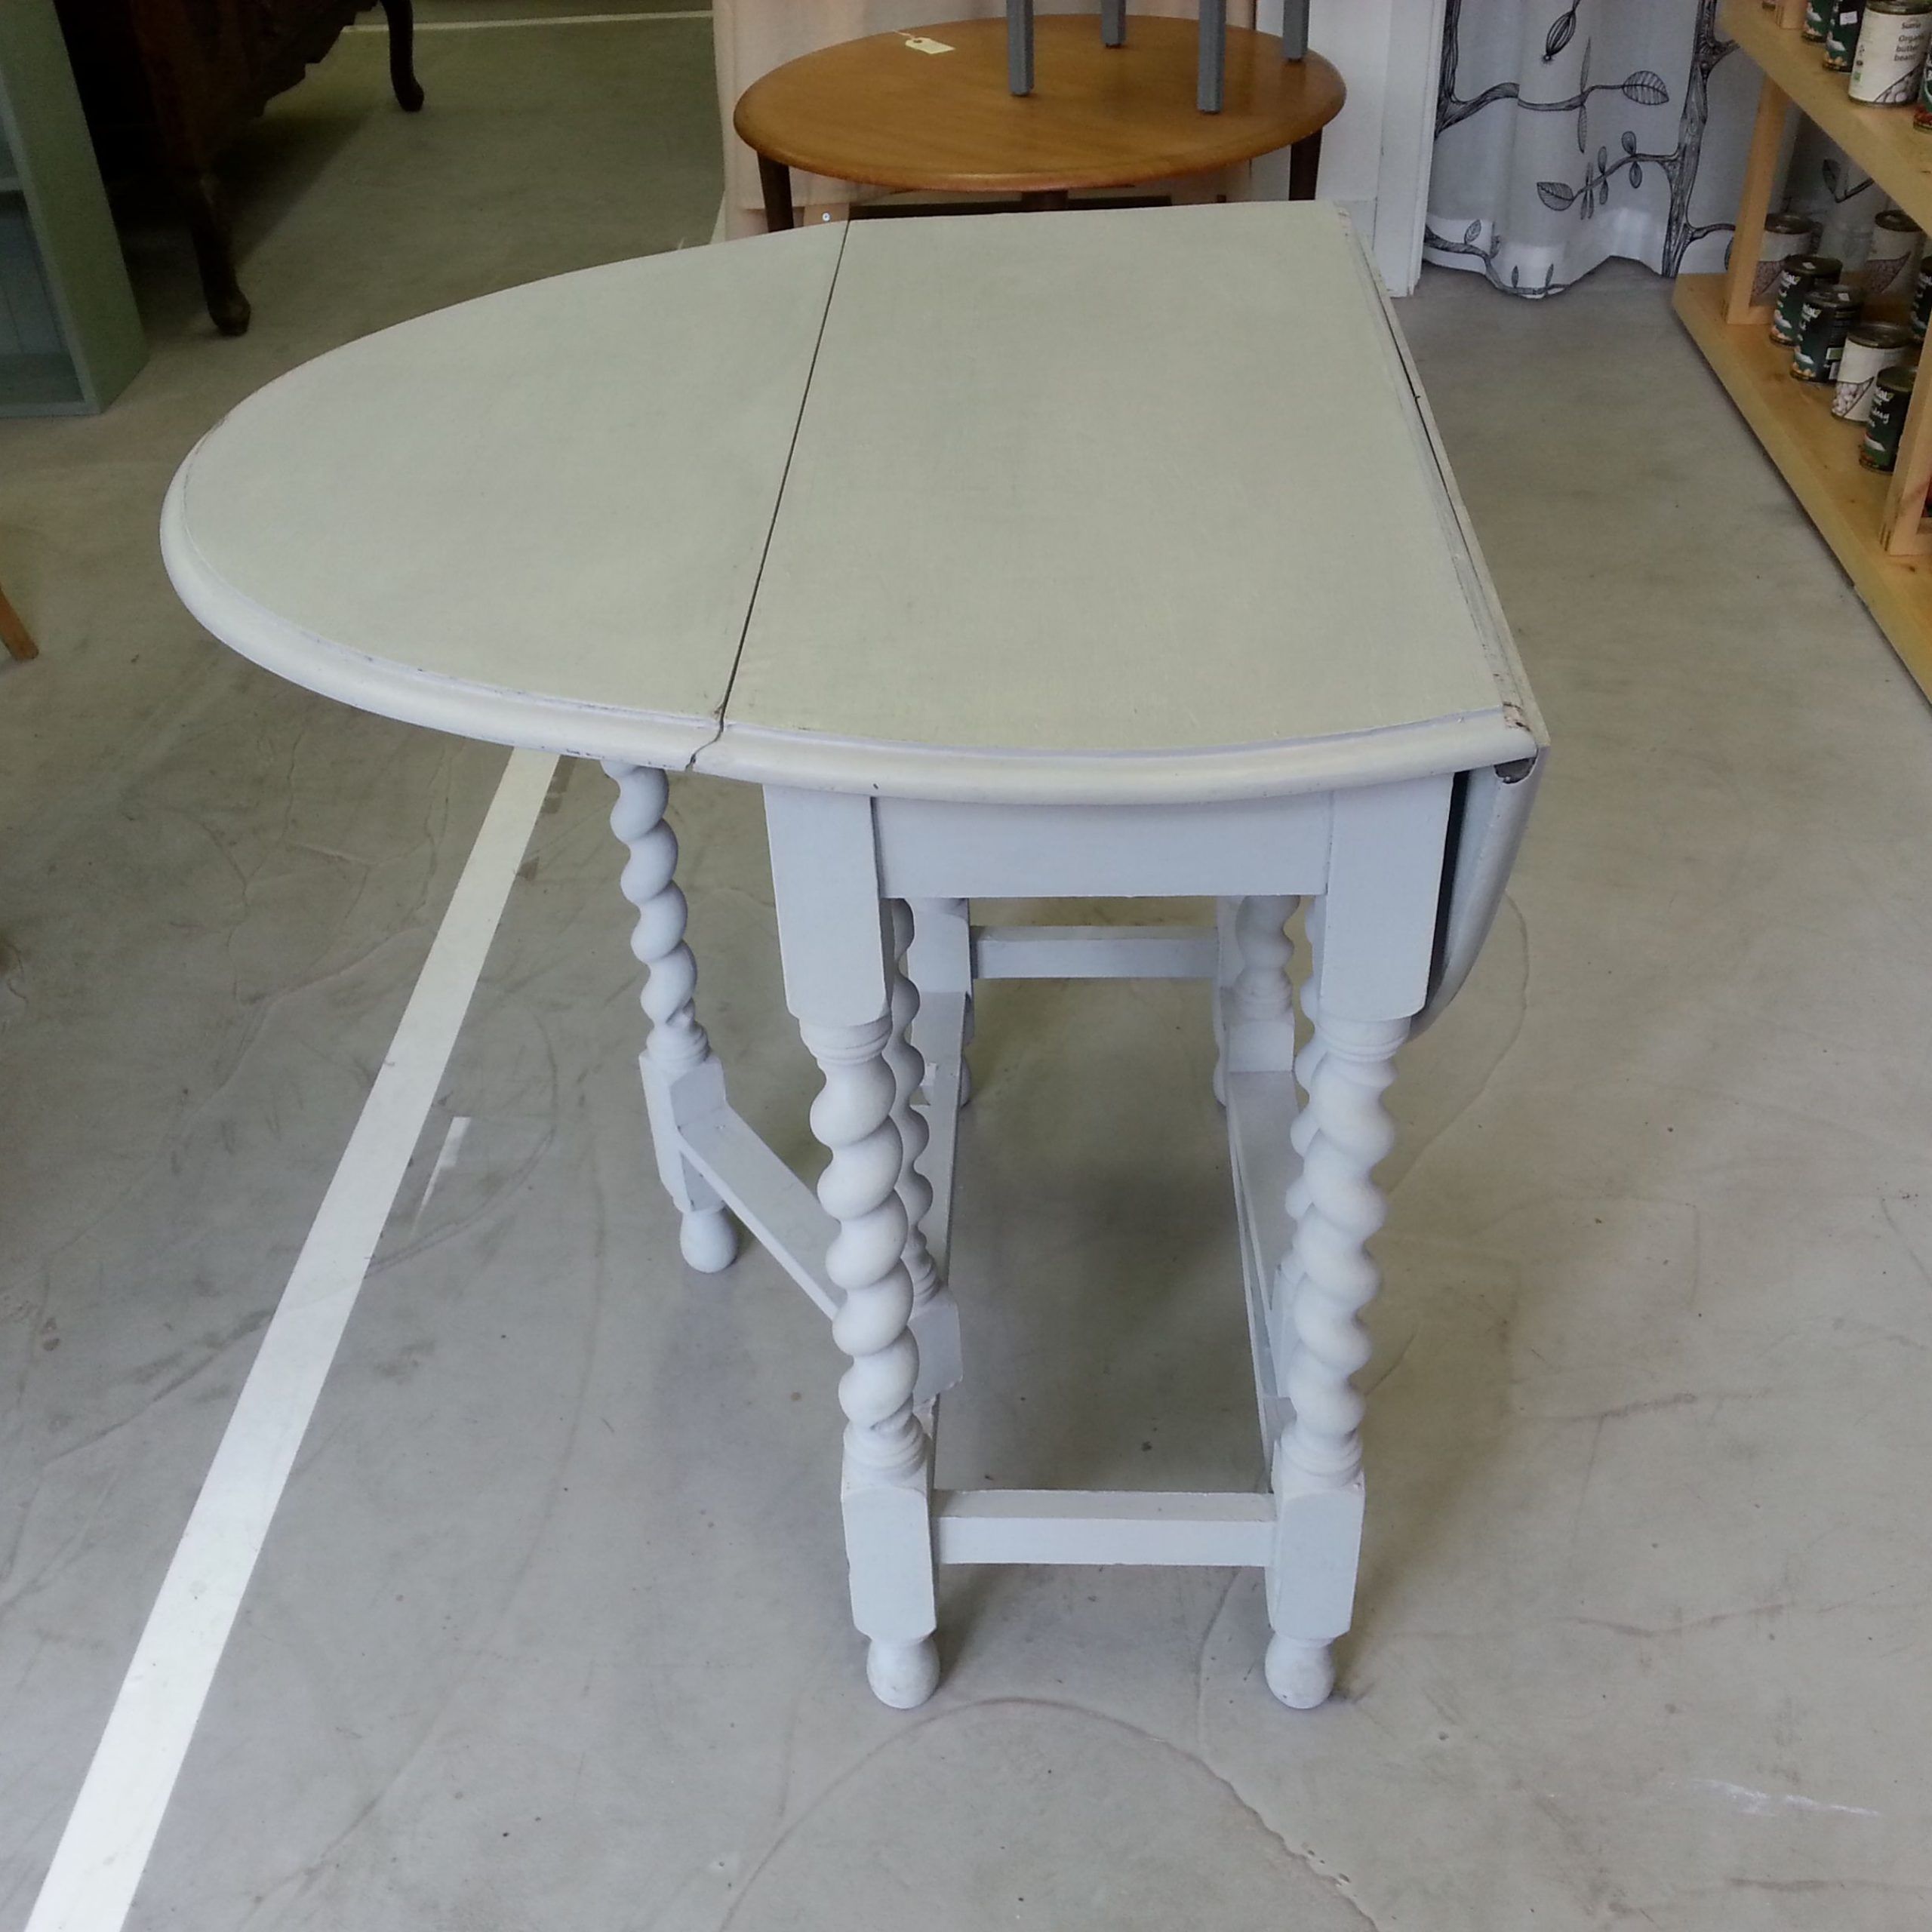 Small Drop Leaf Table With Barley Twist Legs In Paris Grey Chalkpaint Inside Gray Drop Leaf Console Dining Tables (View 11 of 15)